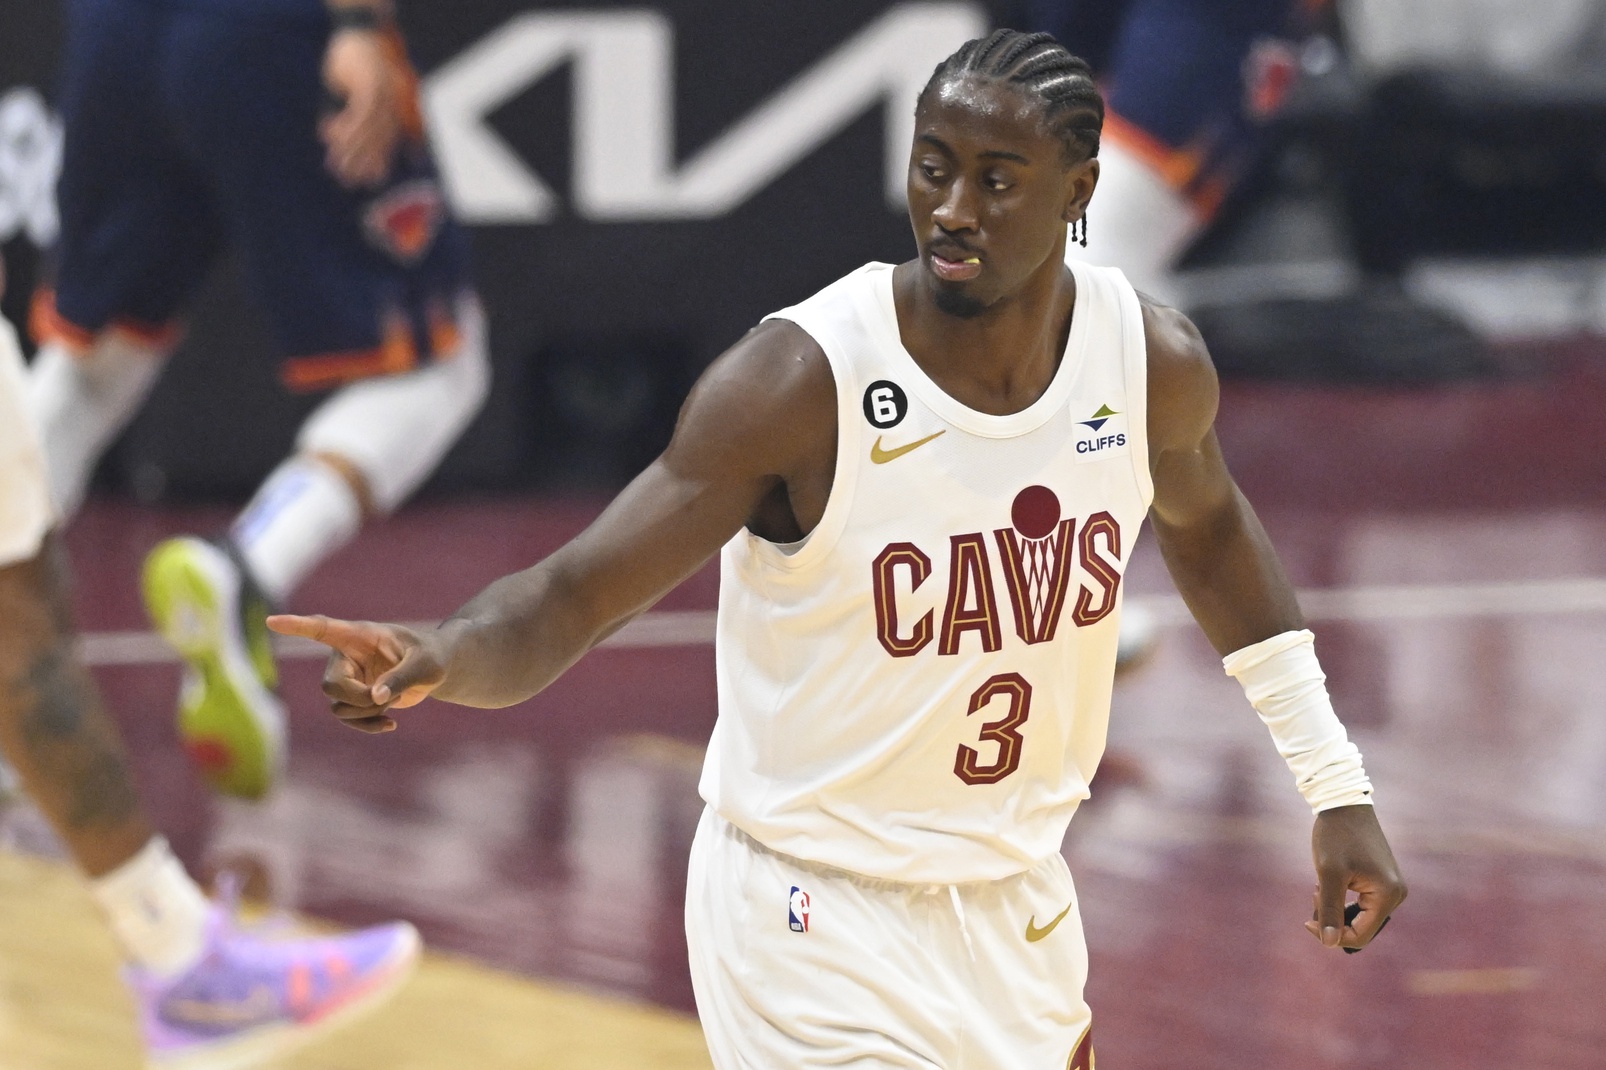 Apr 26, 2023; Cleveland, Ohio, USA; Cleveland Cavaliers guard Caris LeVert (3) celebrates a three-point basket in the first quarter during game five of the 2023 NBA playoffs against the New York Knicks at Rocket Mortgage FieldHouse. Mandatory Credit: David Richard-USA TODAY Sports